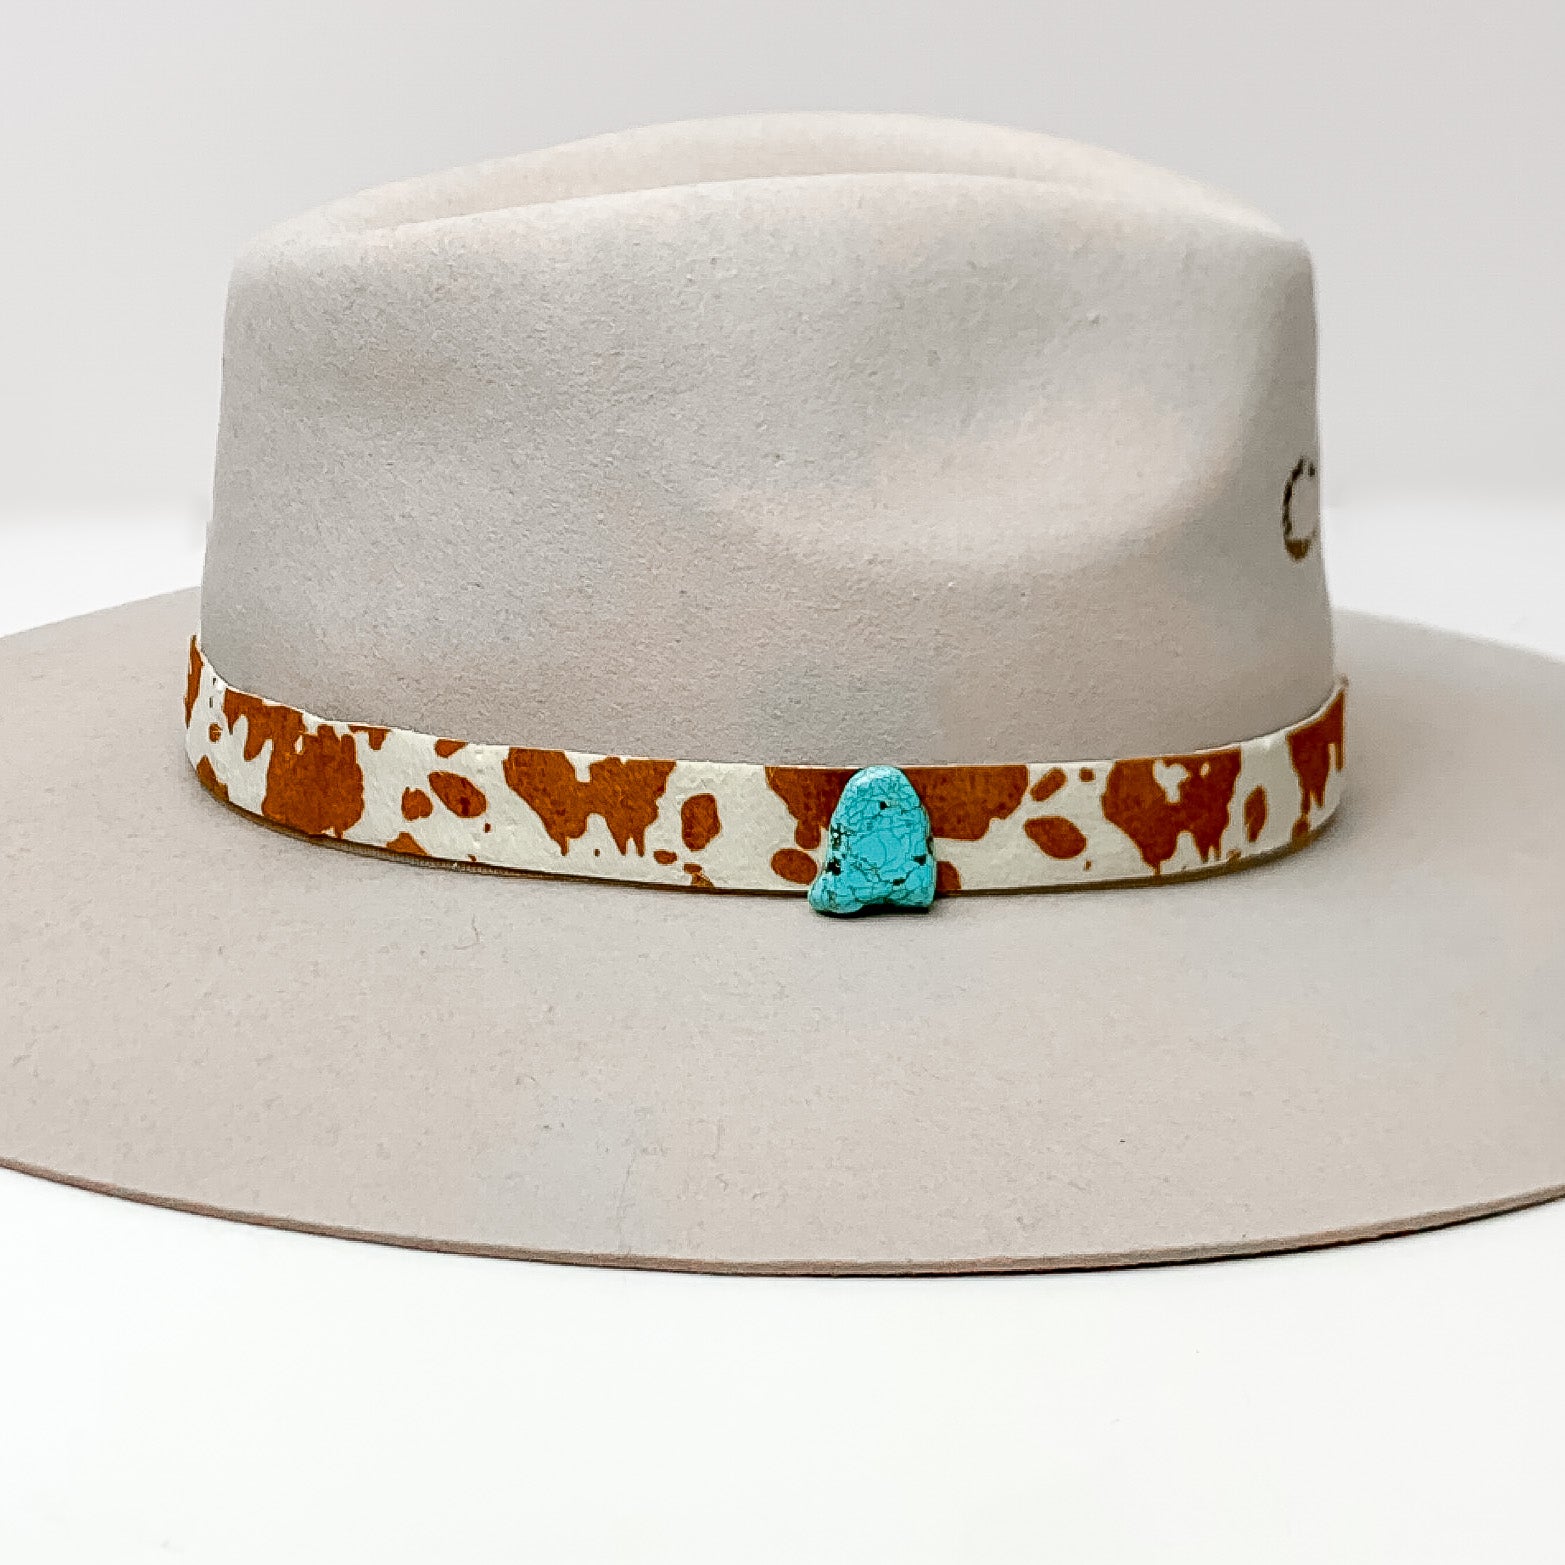 Cow Print Hat Band with Faux Turquoise Charm in Brown, and Ivory. Pictured on a white background with the band around a light tan/ brown hat.